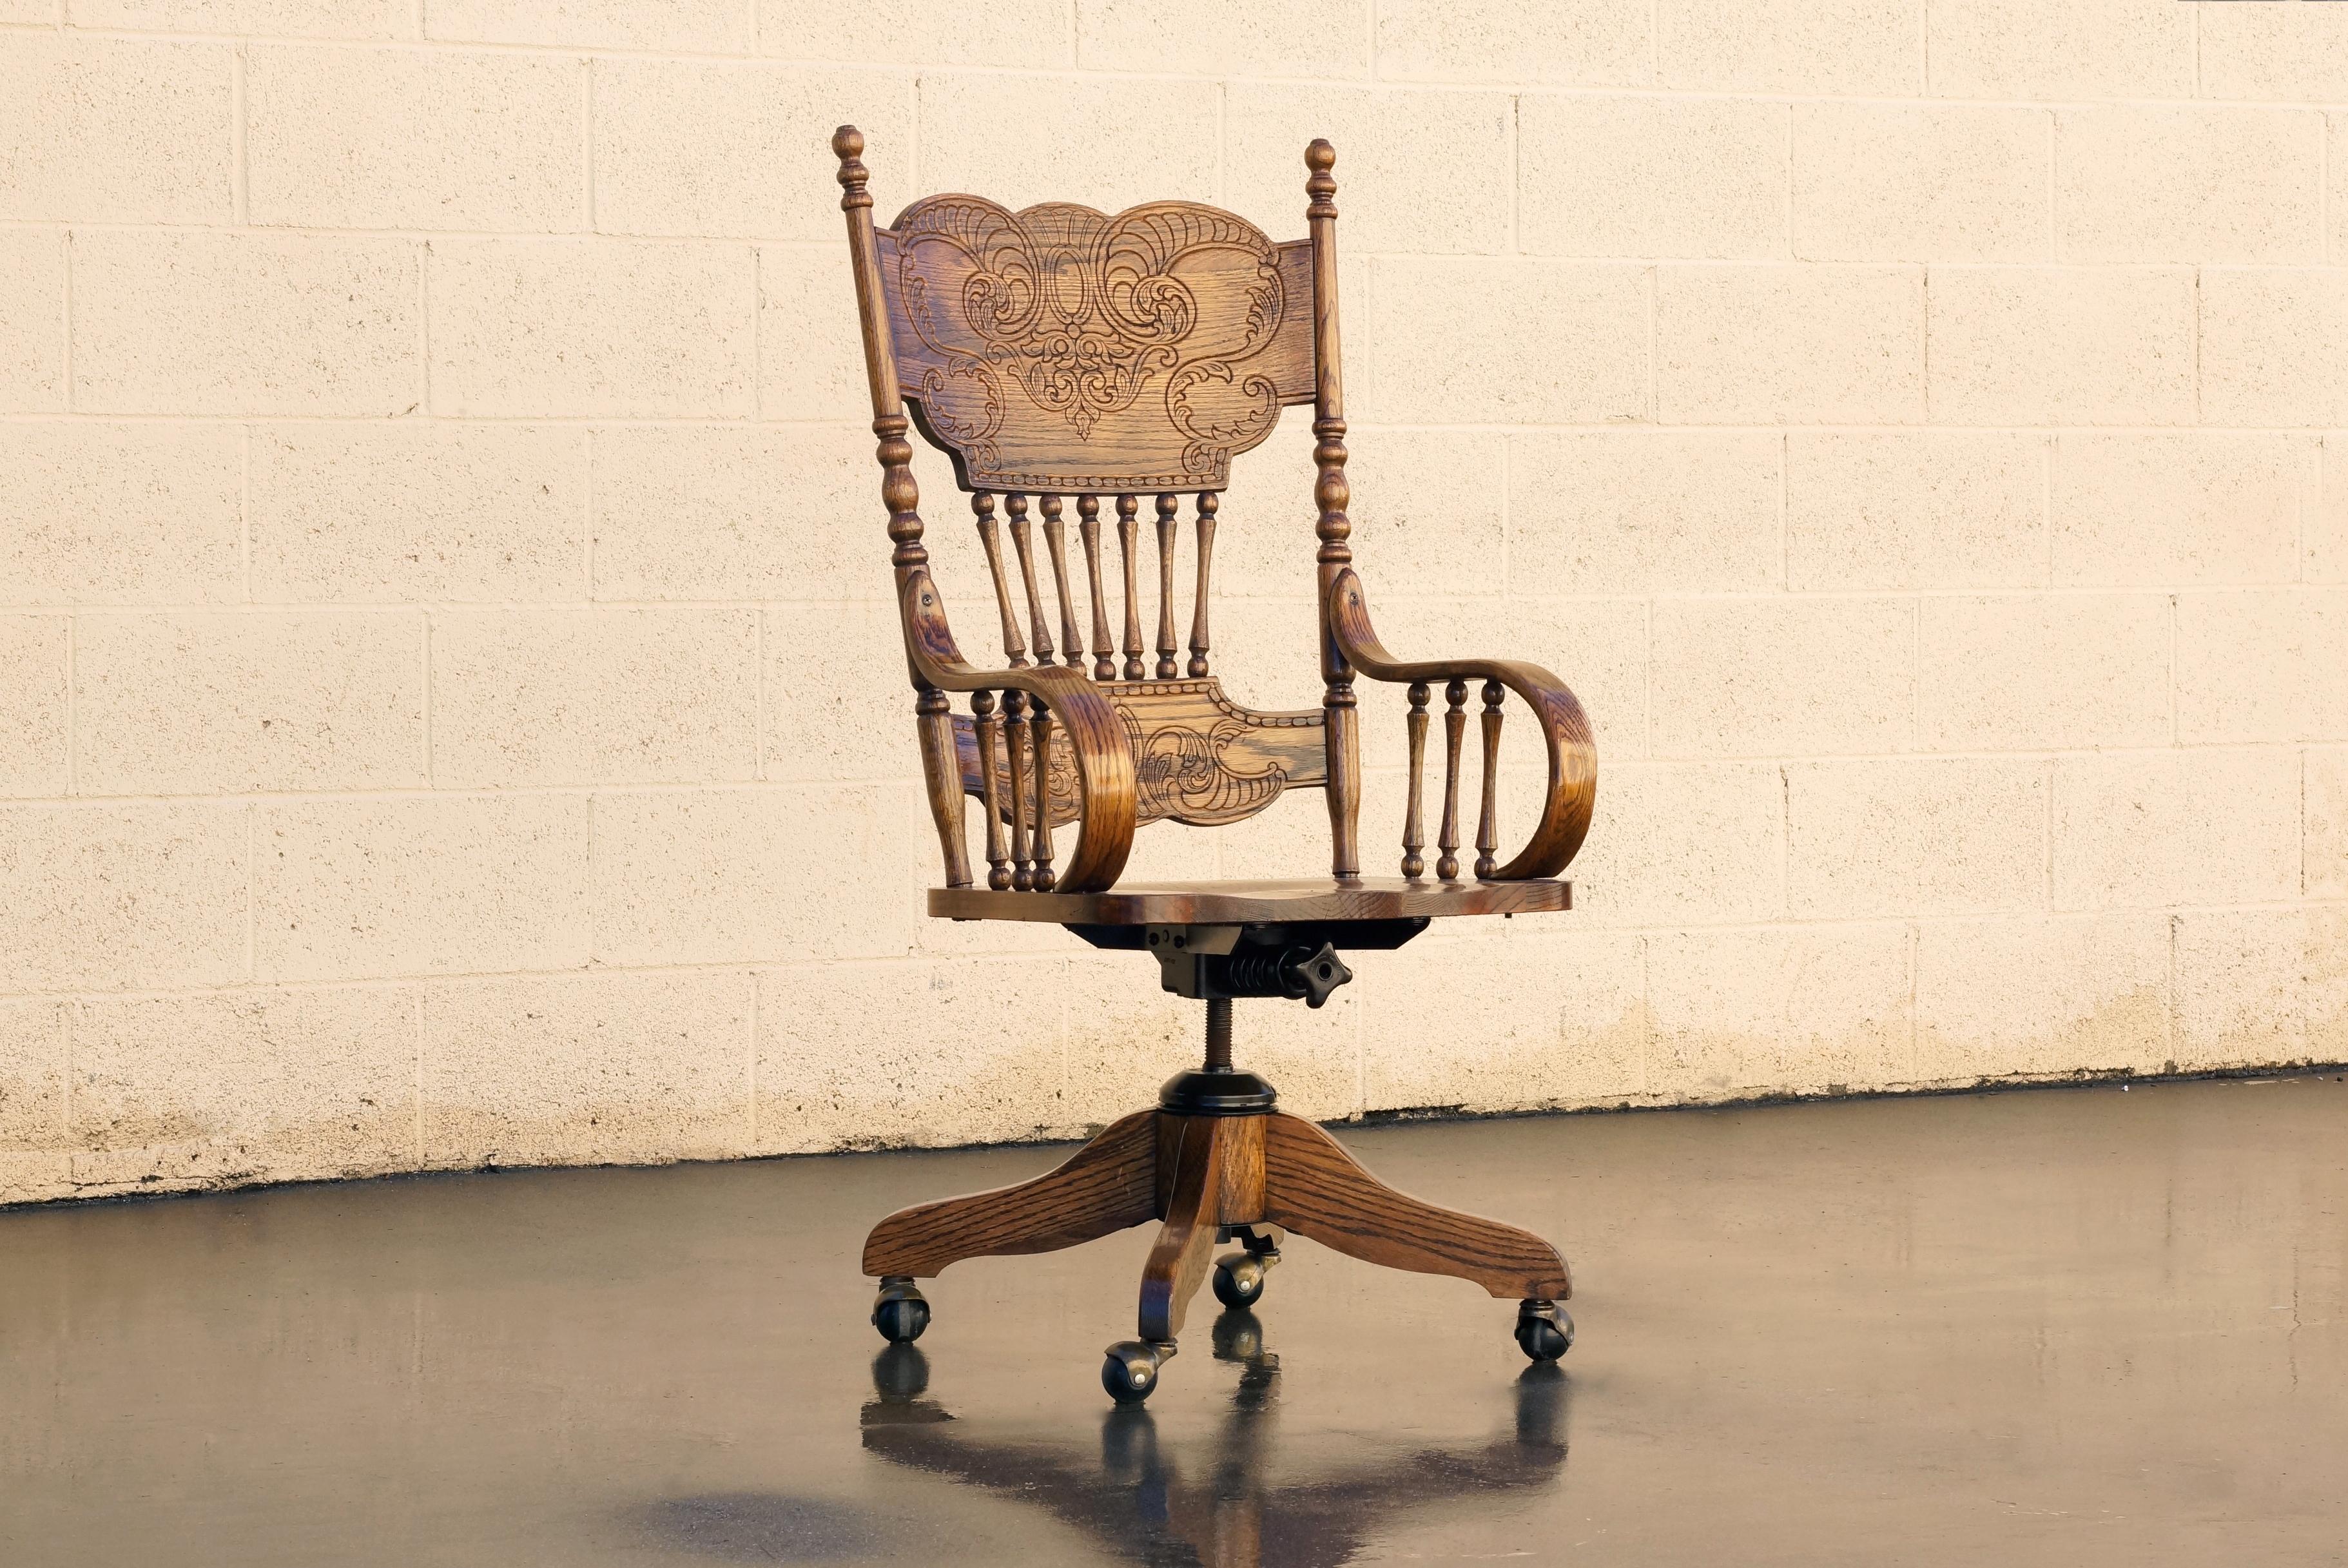 Antique oak steno chair with wonderful press back design. This beautifully crafted seat also features thick bentwood arms, spindles, hooded casters and original steel hardware. In excellent condition with a golden oak patina; reconditioned wood.